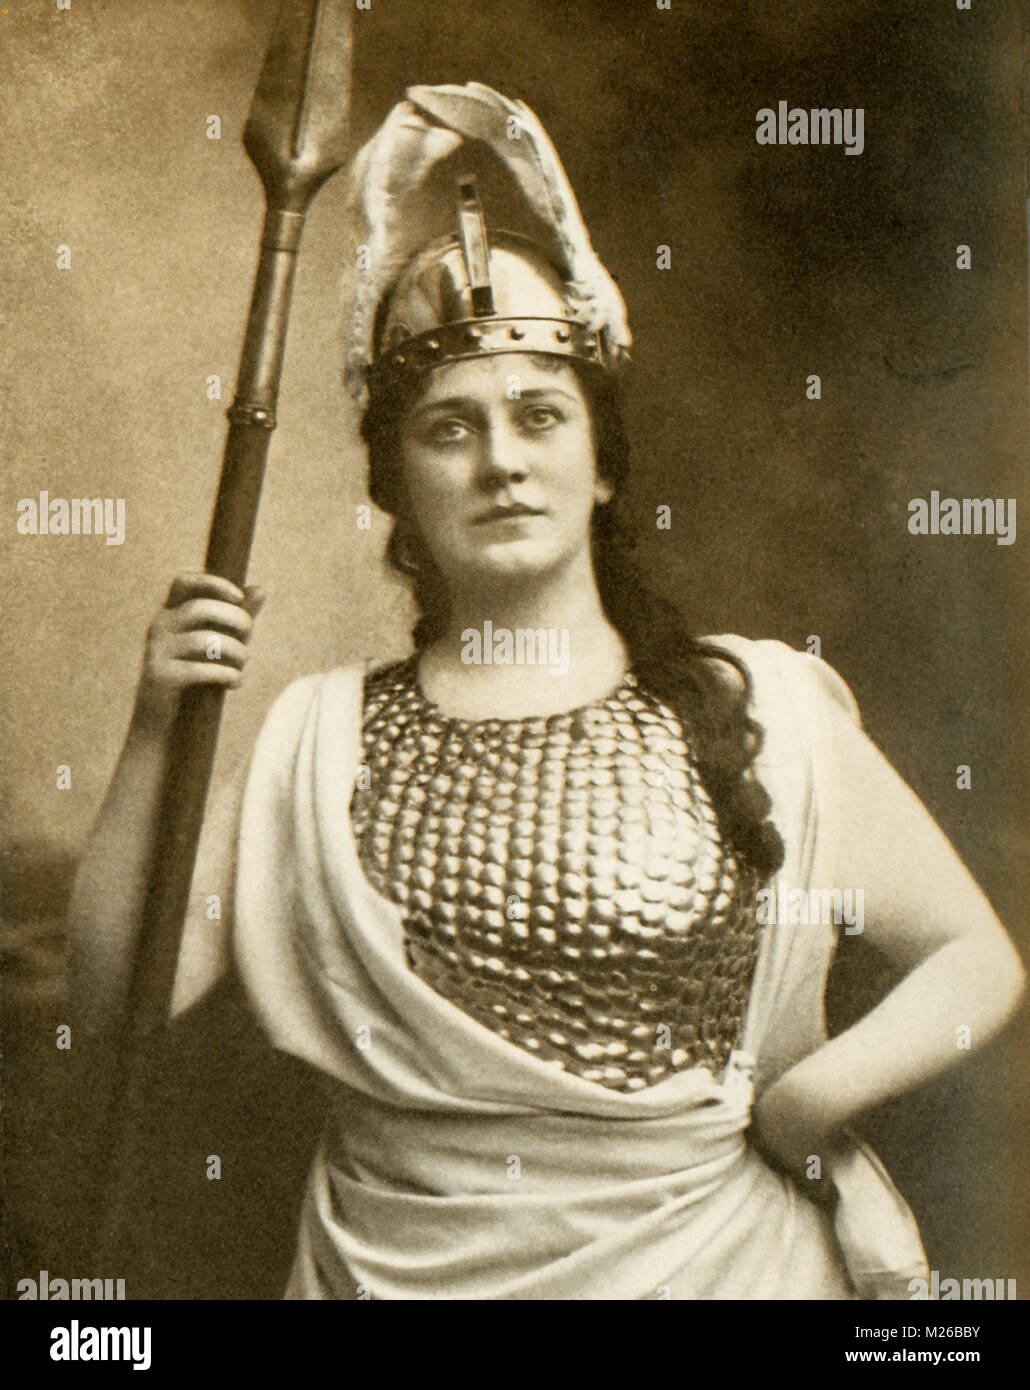 This photo shows Madame Lillian Nordica as Brunhilde in Wagner's Valkyrie. Nordica was an American prima donna who was born in Farmington, Maine, in 1859 and became of greatest Brunhildes of the day and famous in all the great Wagnerian music-dramas such as Lohengrin, The Valhyrie, and Tristan and Isolde. She made operatic debut at Brescia in 1879 in La Traviata. Stock Photo